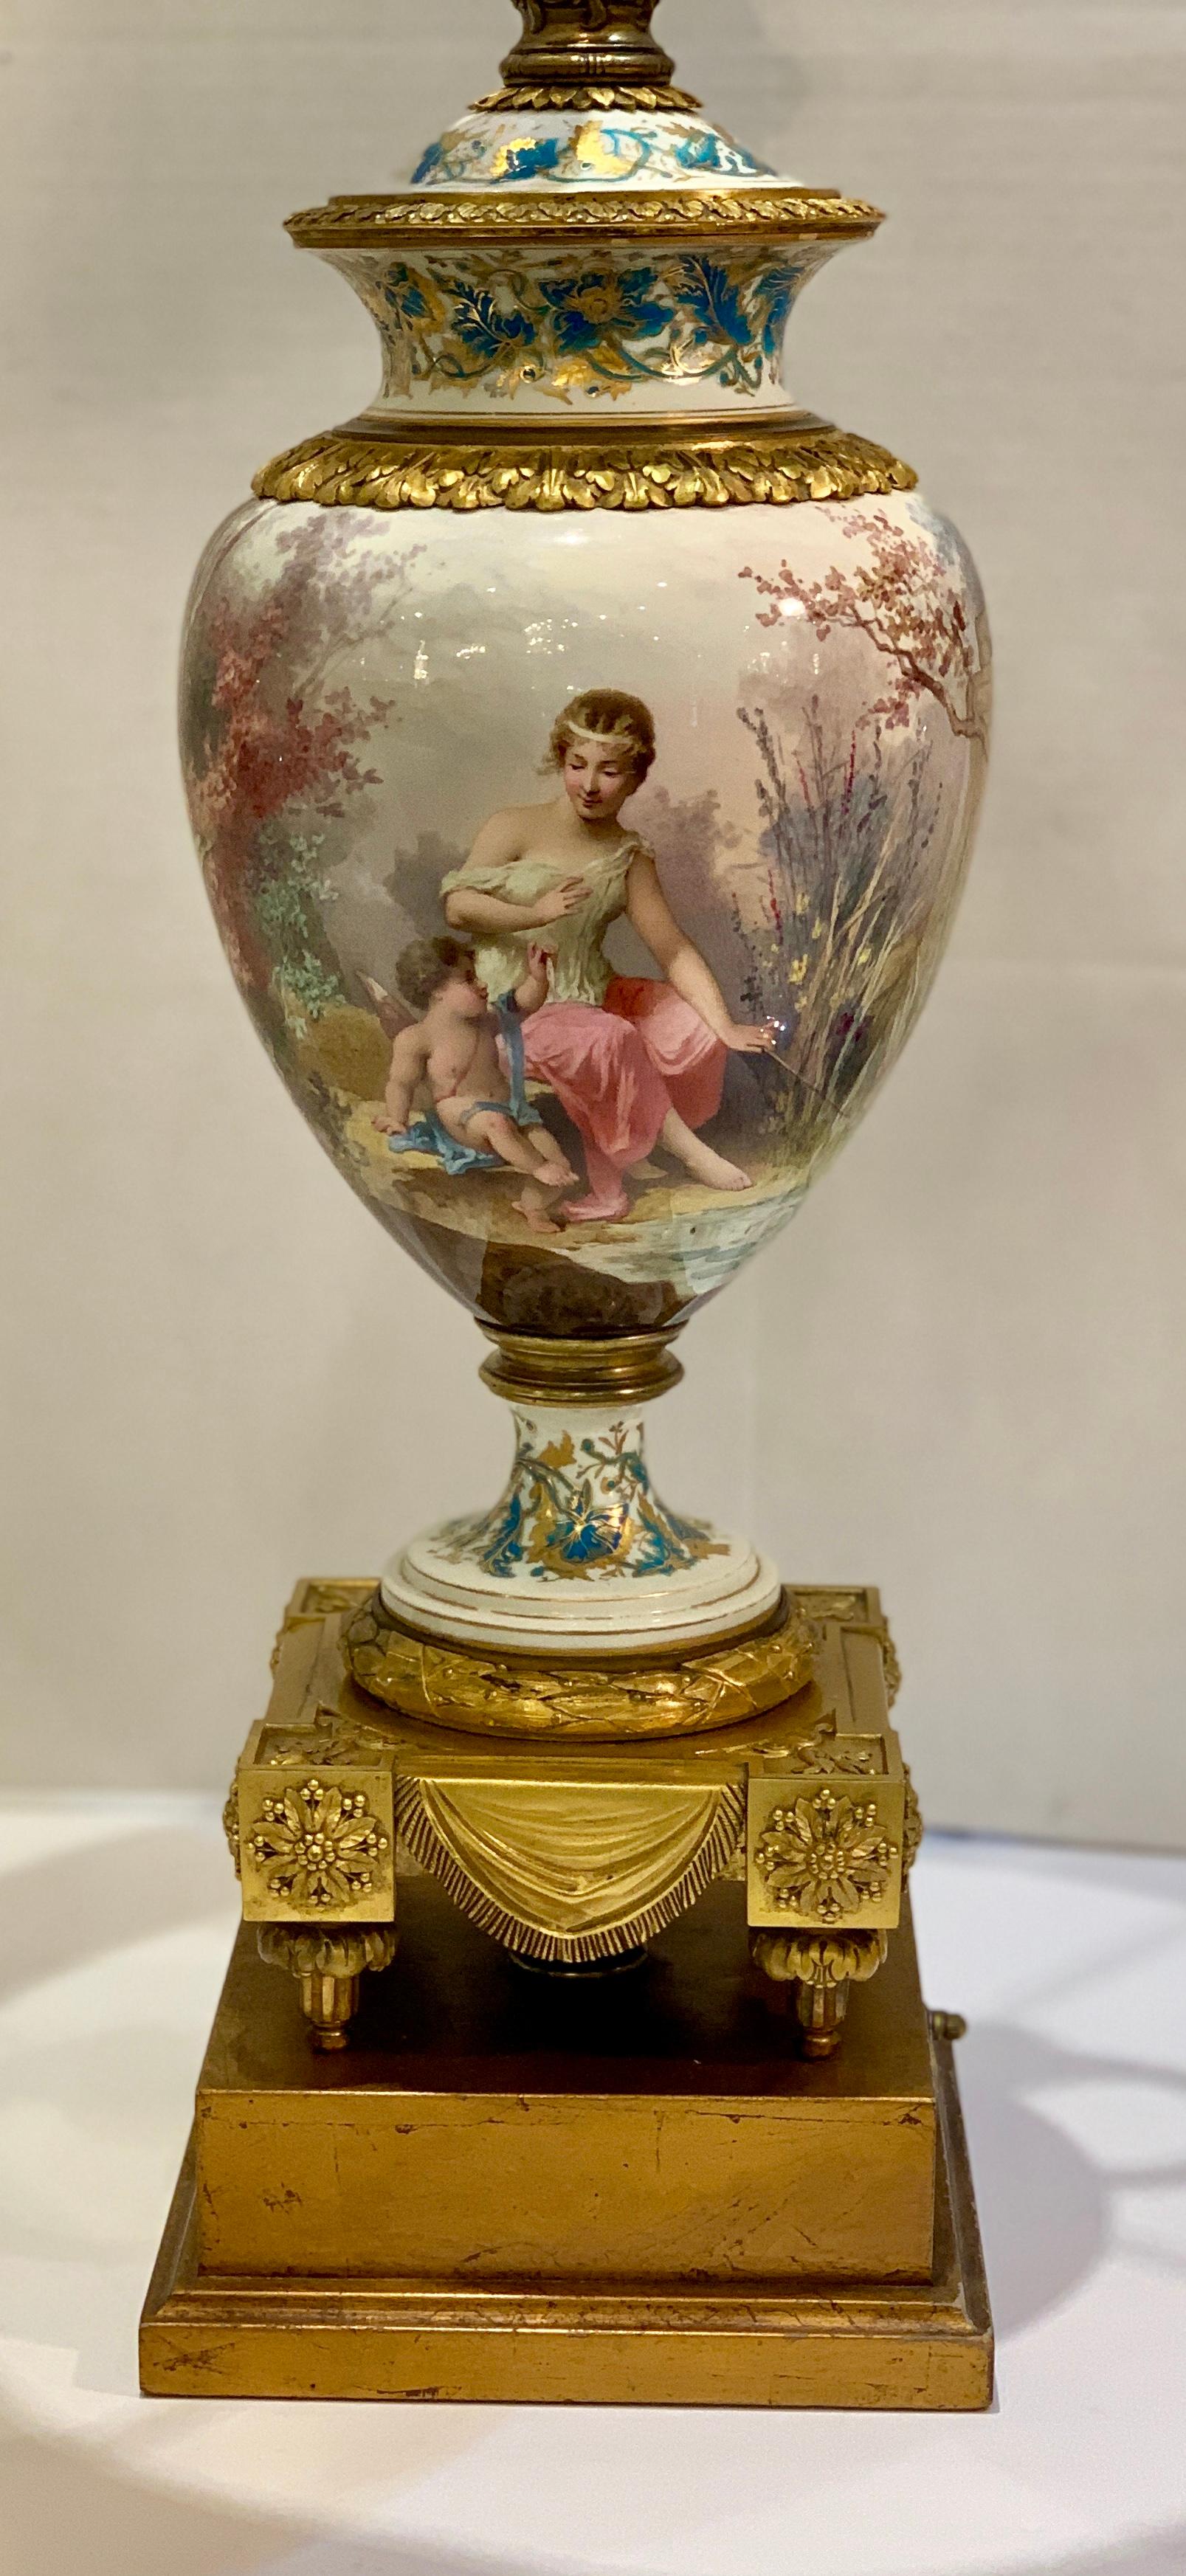 True works of art, these magnificently hand painted, Sevres or psudo-Sevres porcelain lamps from the late 19th century were originally lidded vases. Exquisitely painted in the round and signed by the famous artist Charles Lebarre, and featuring 4